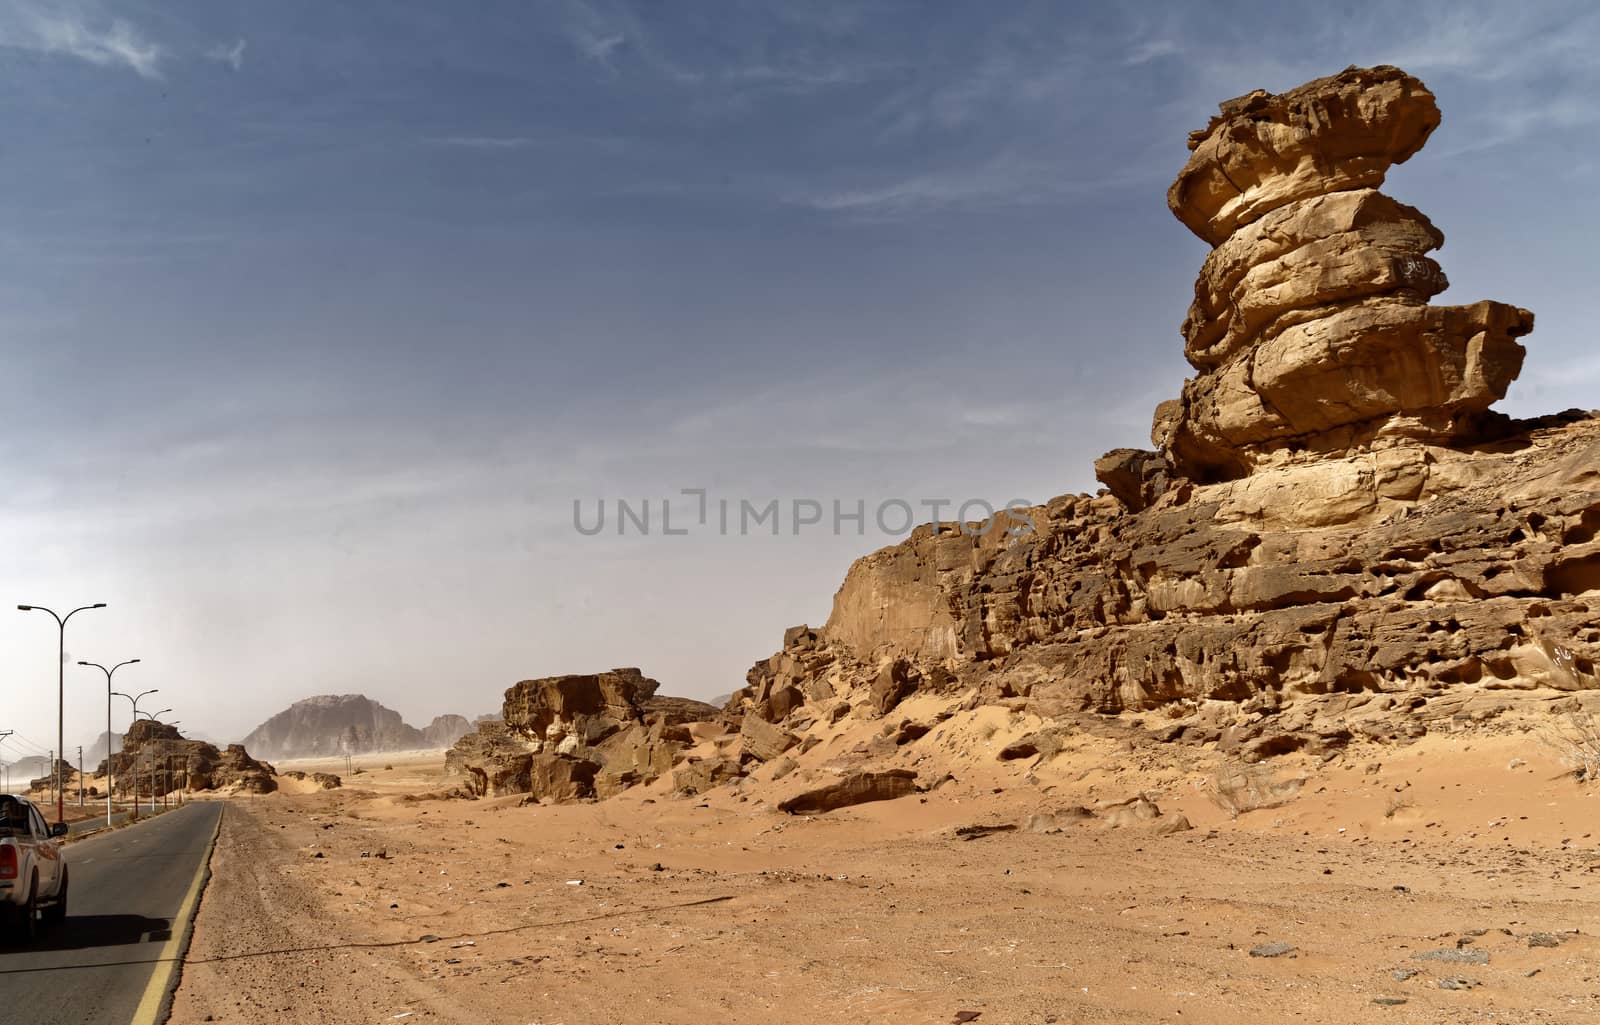 Main road south of the Wadi Rum Nature Reserve, with impressive rock formations at the roadside by geogif